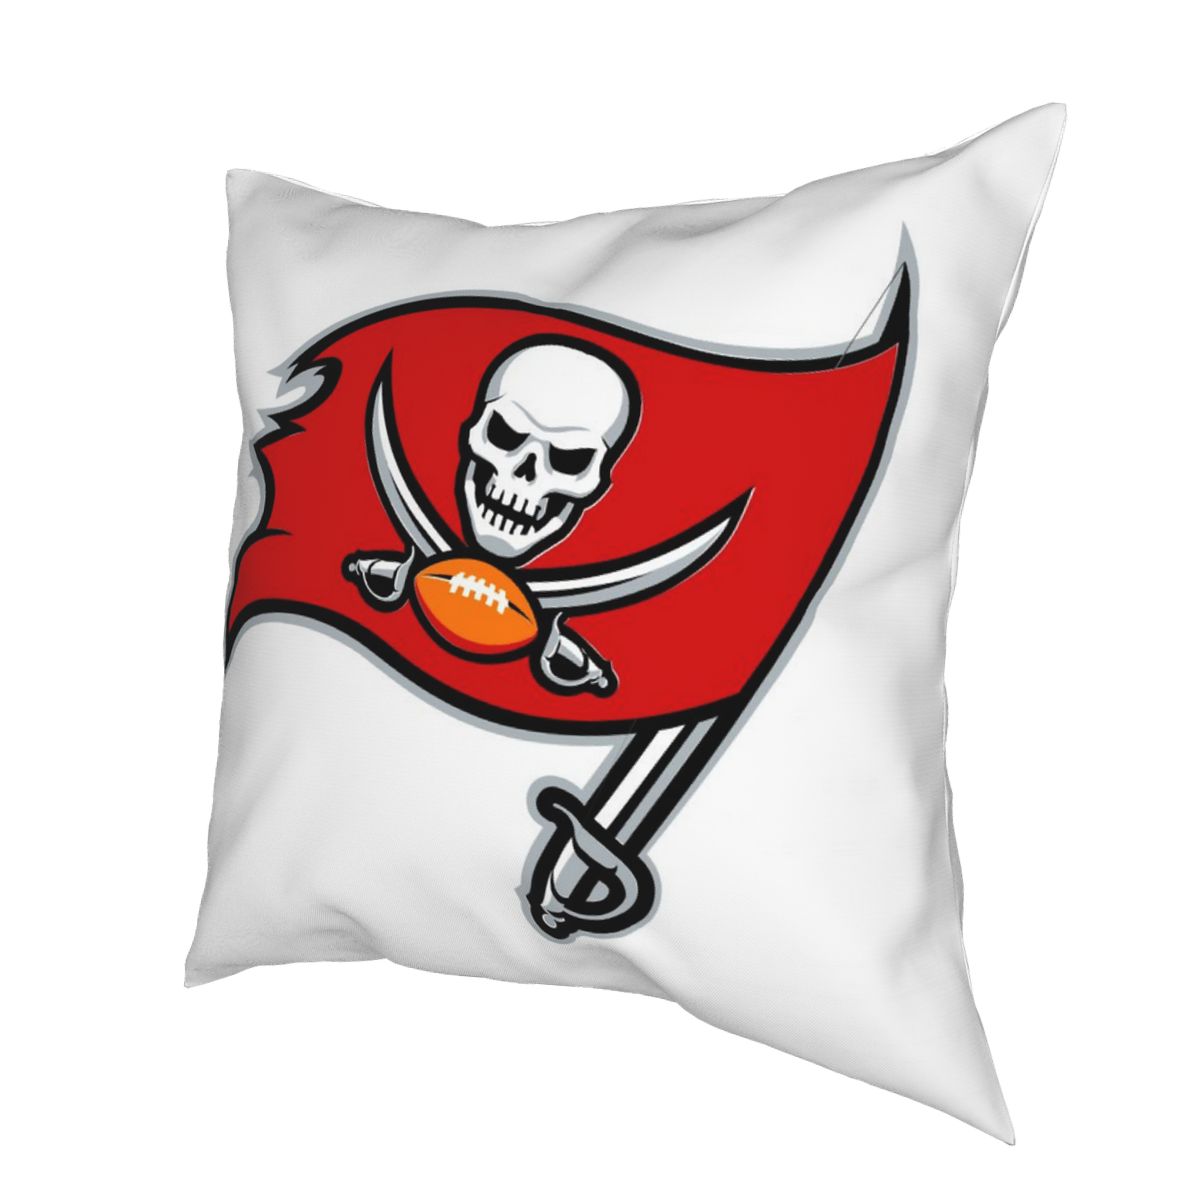 Custom Decorative Football Pillow Case Tampa Bay Buccaneers White Pillowcase Personalized Throw Pillow Covers